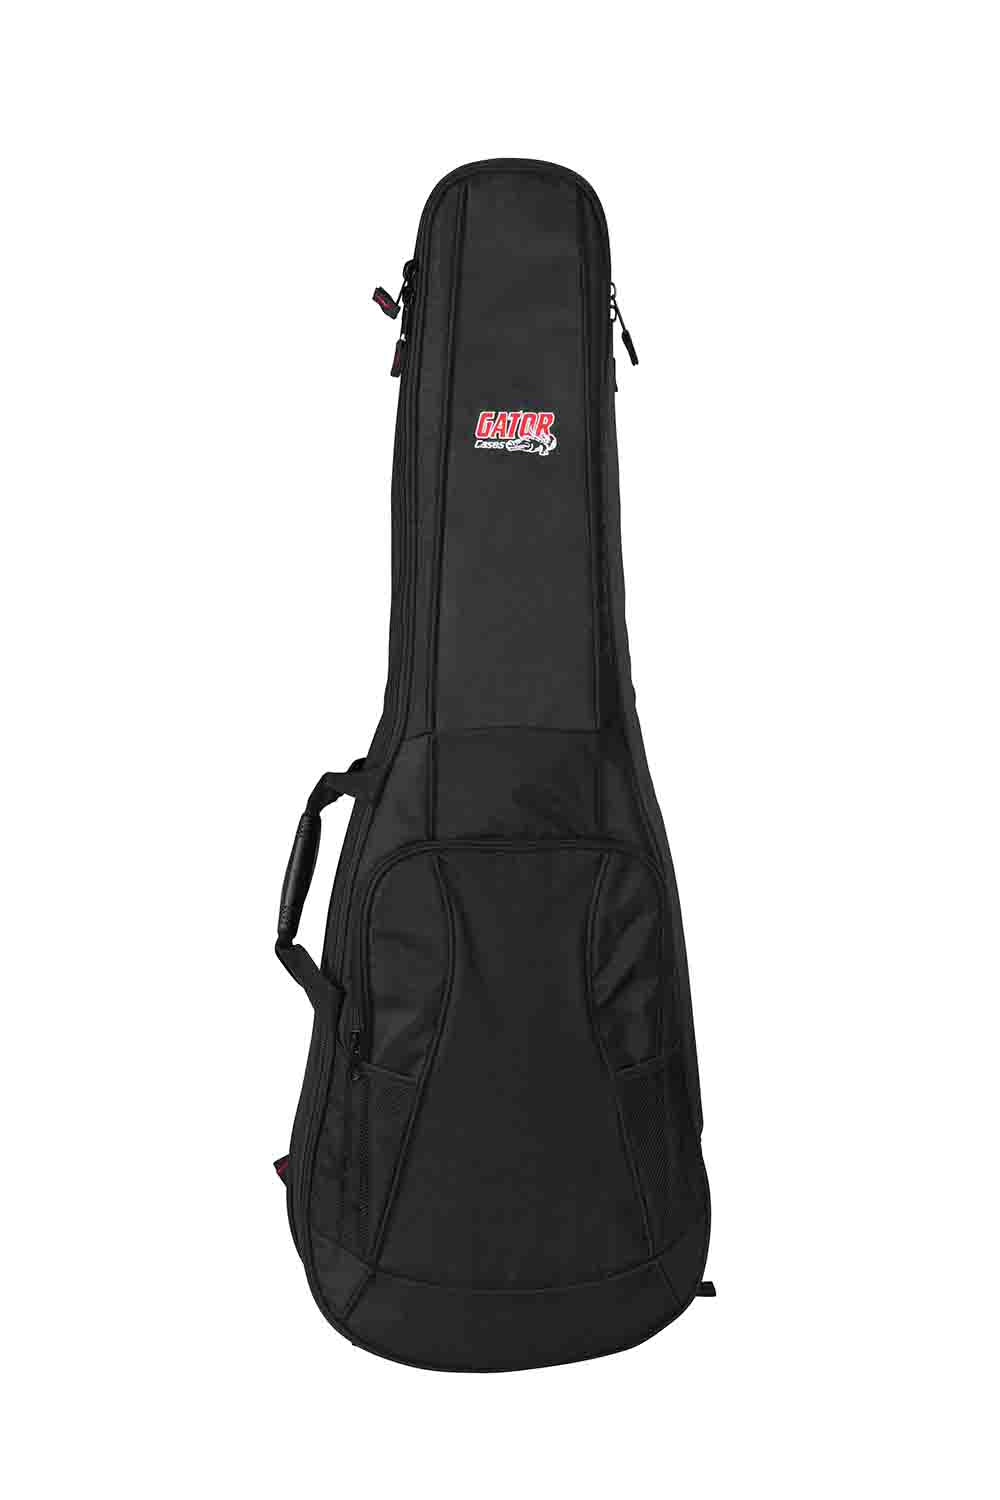 Gator Cases GB-4G-ELECX2 4G Style Gig Bag for 2 Electric Guitars with Adjustable Backpack Straps - Hollywood DJ